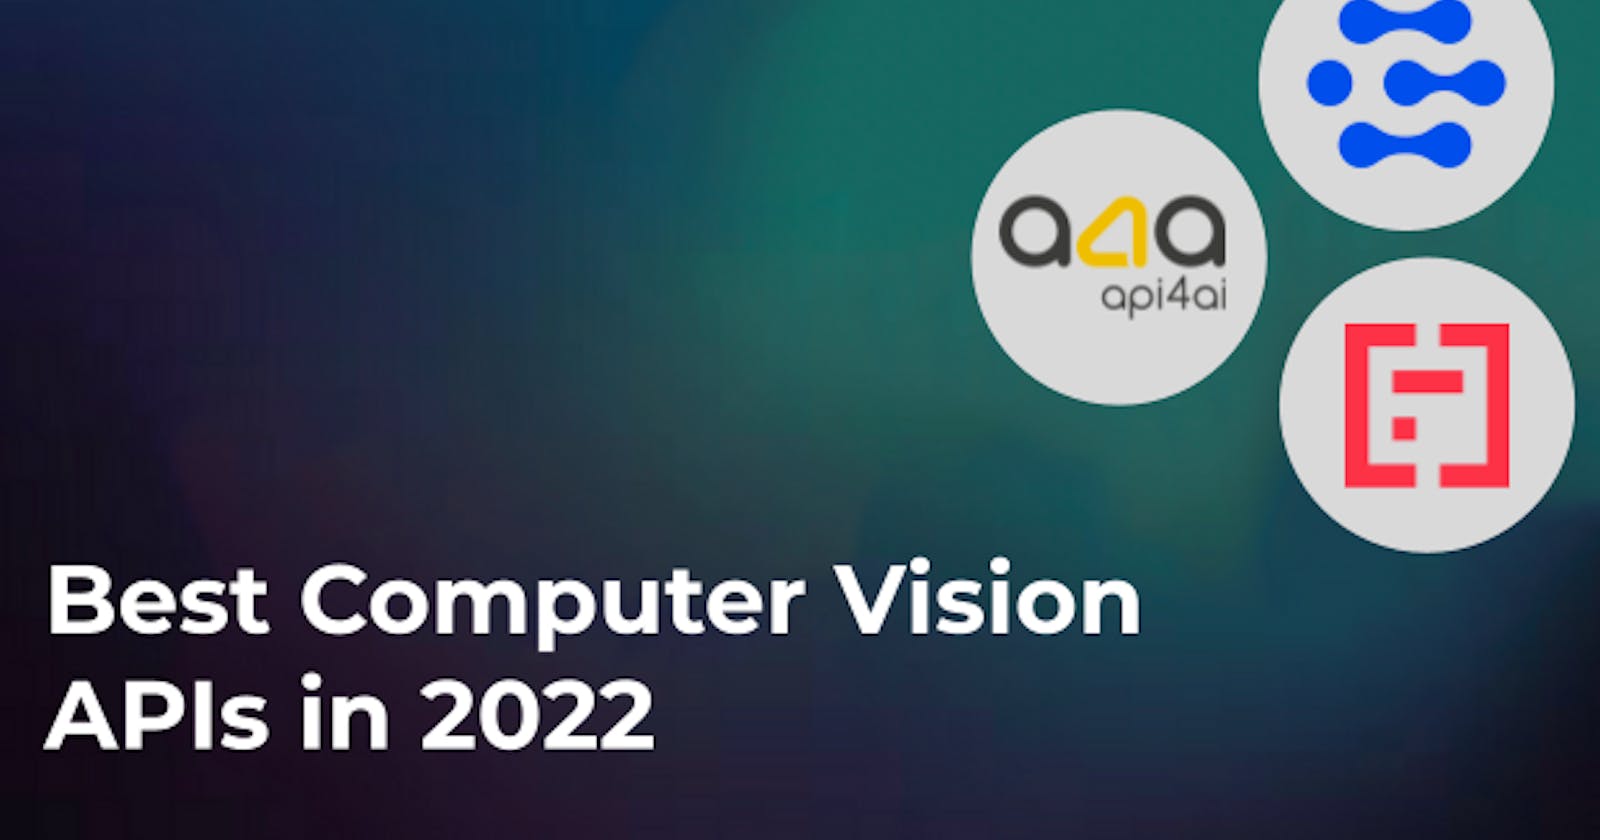 Best Computer Vision APIs in 2022